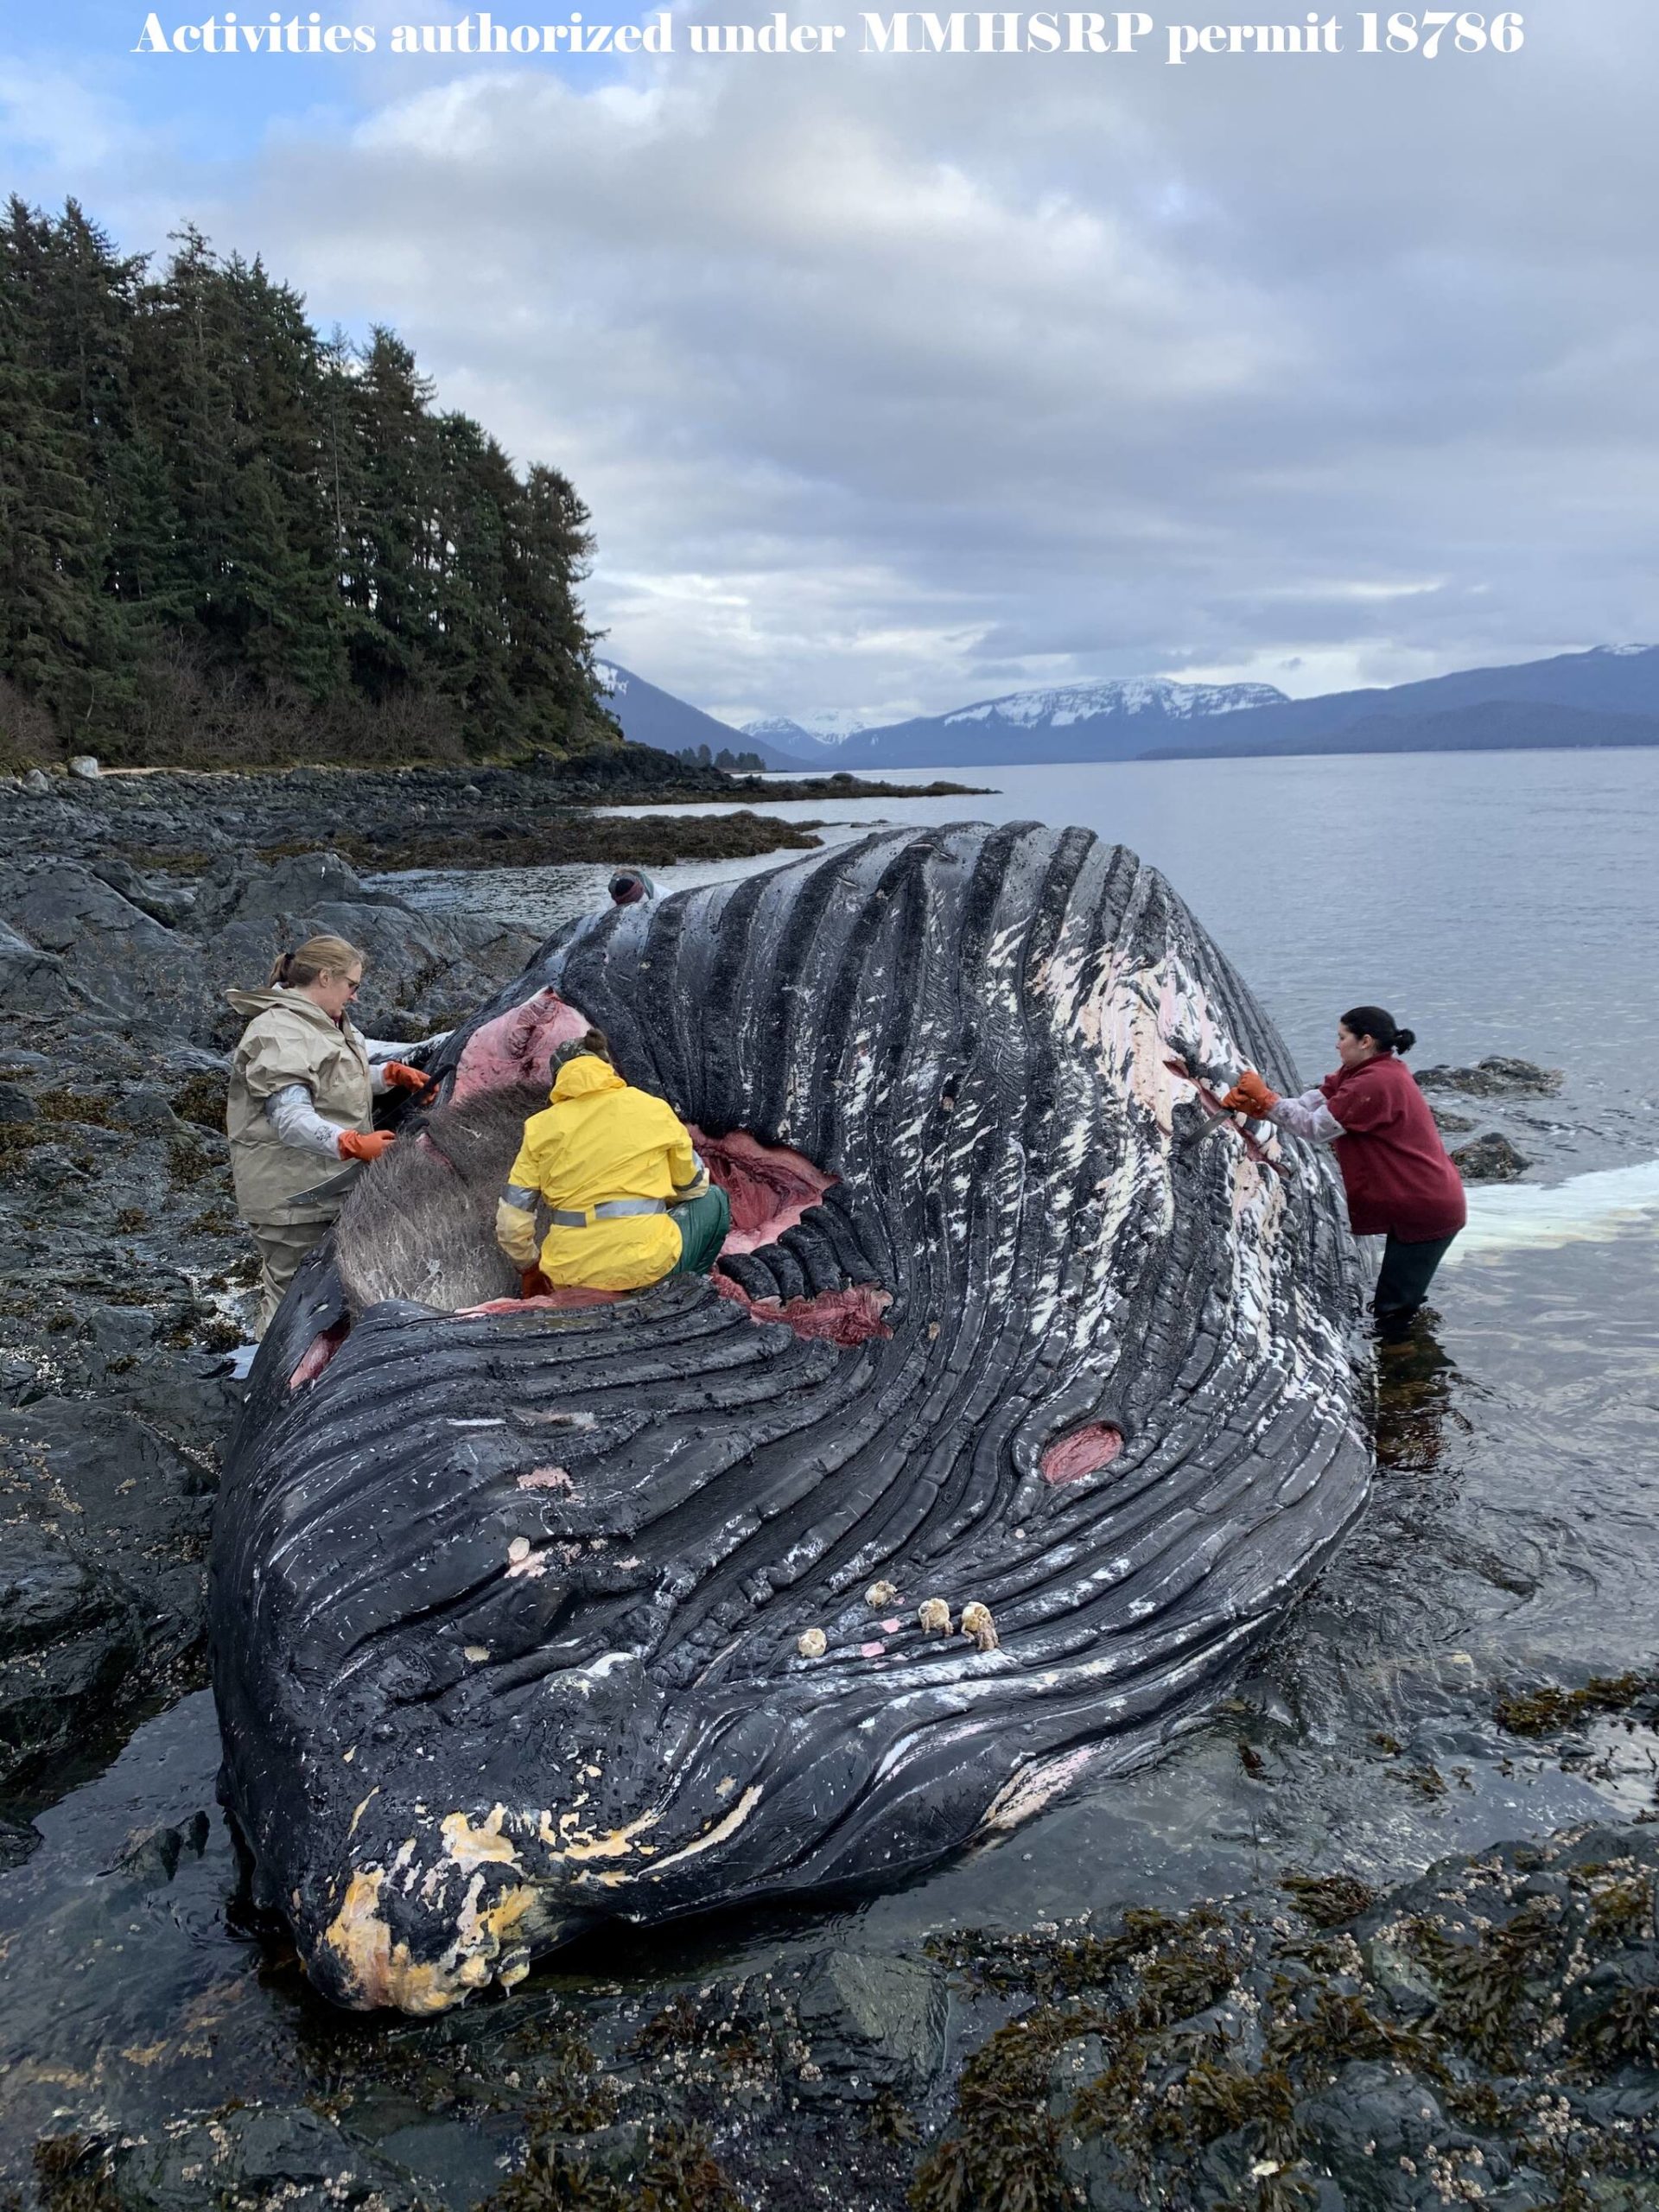 A team from the National Atmospheric and Oceanic Administration performs an authorized necropsy on a humpback whale found dead on Killisnoo Island near Angoon on Feb. 14, 2022. The whale was later carried out to sea. (NOAA Fisheries/ Courtesy photo)